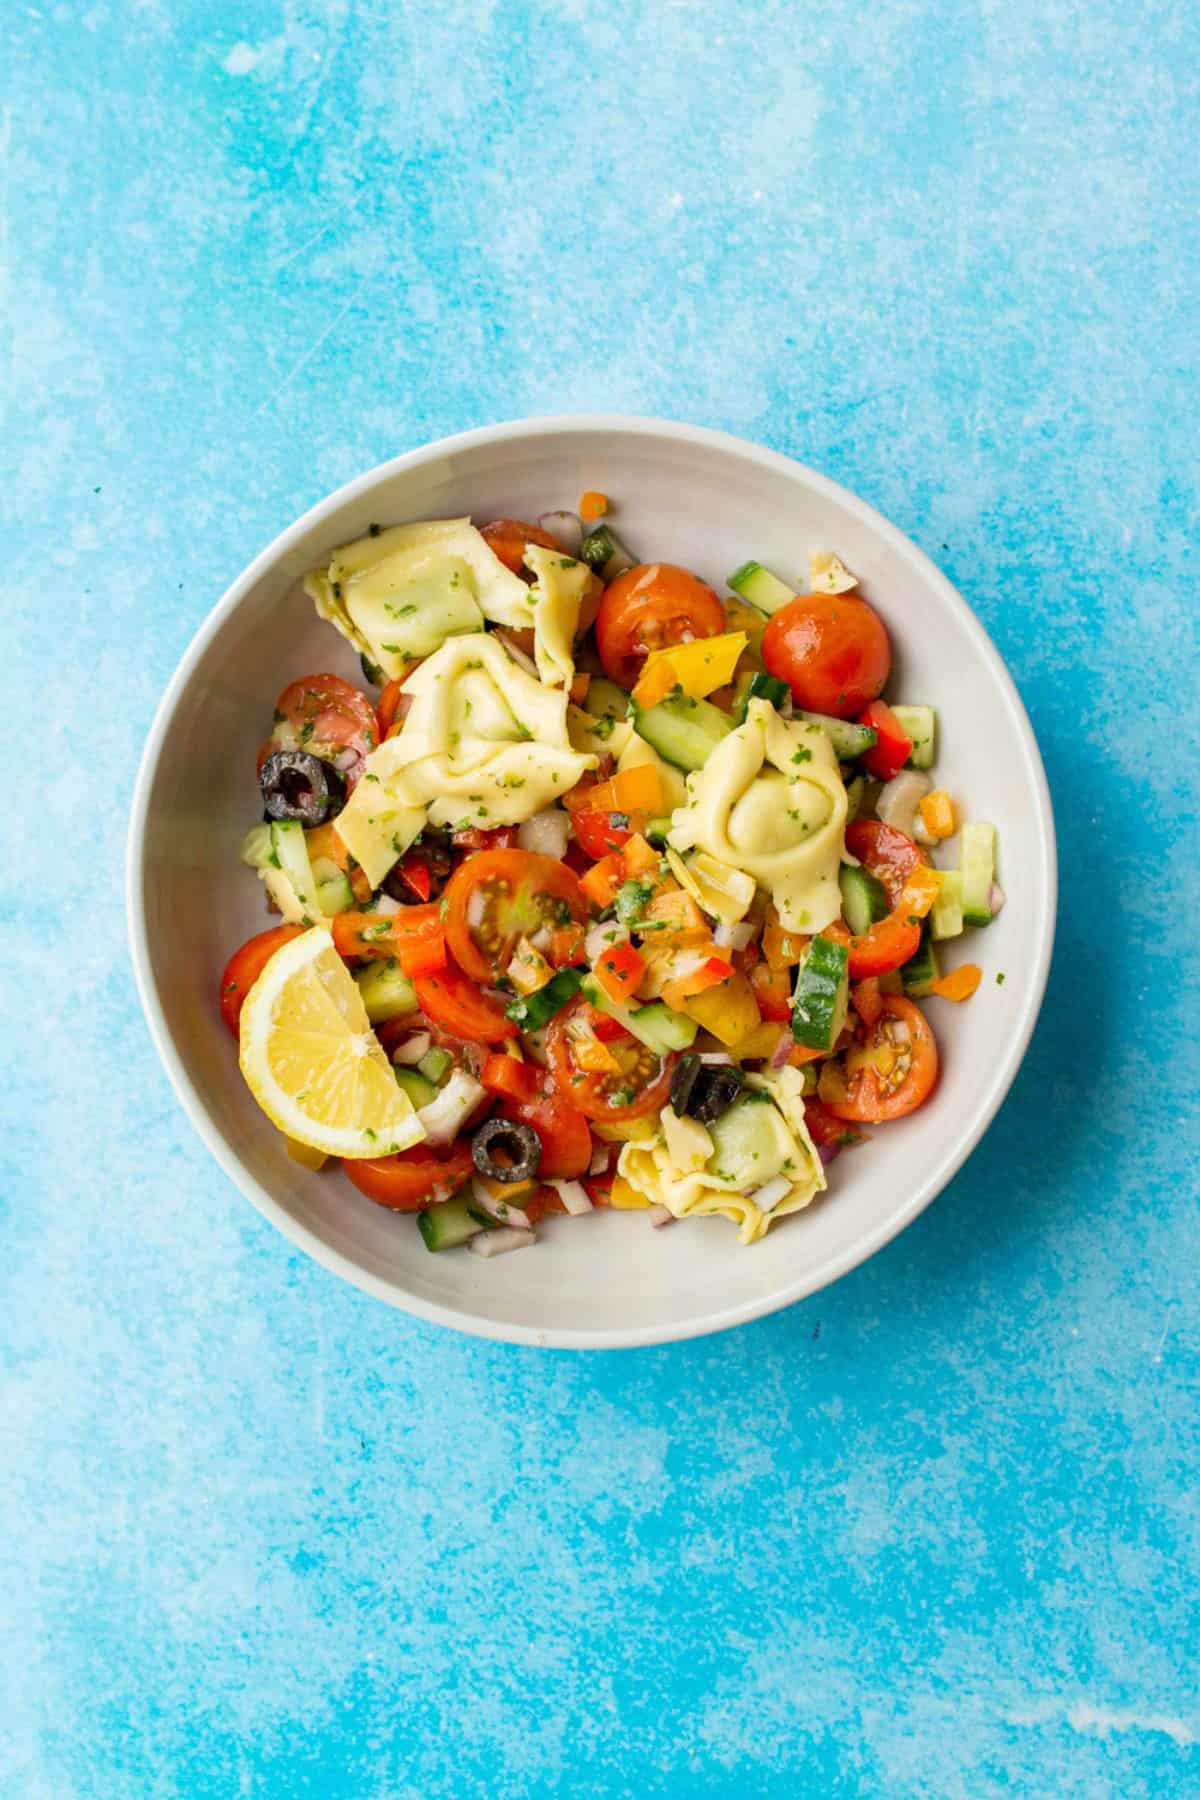 Pasta salad with chopped vegetables with a lemon wedge in a white bowl on a blue background.